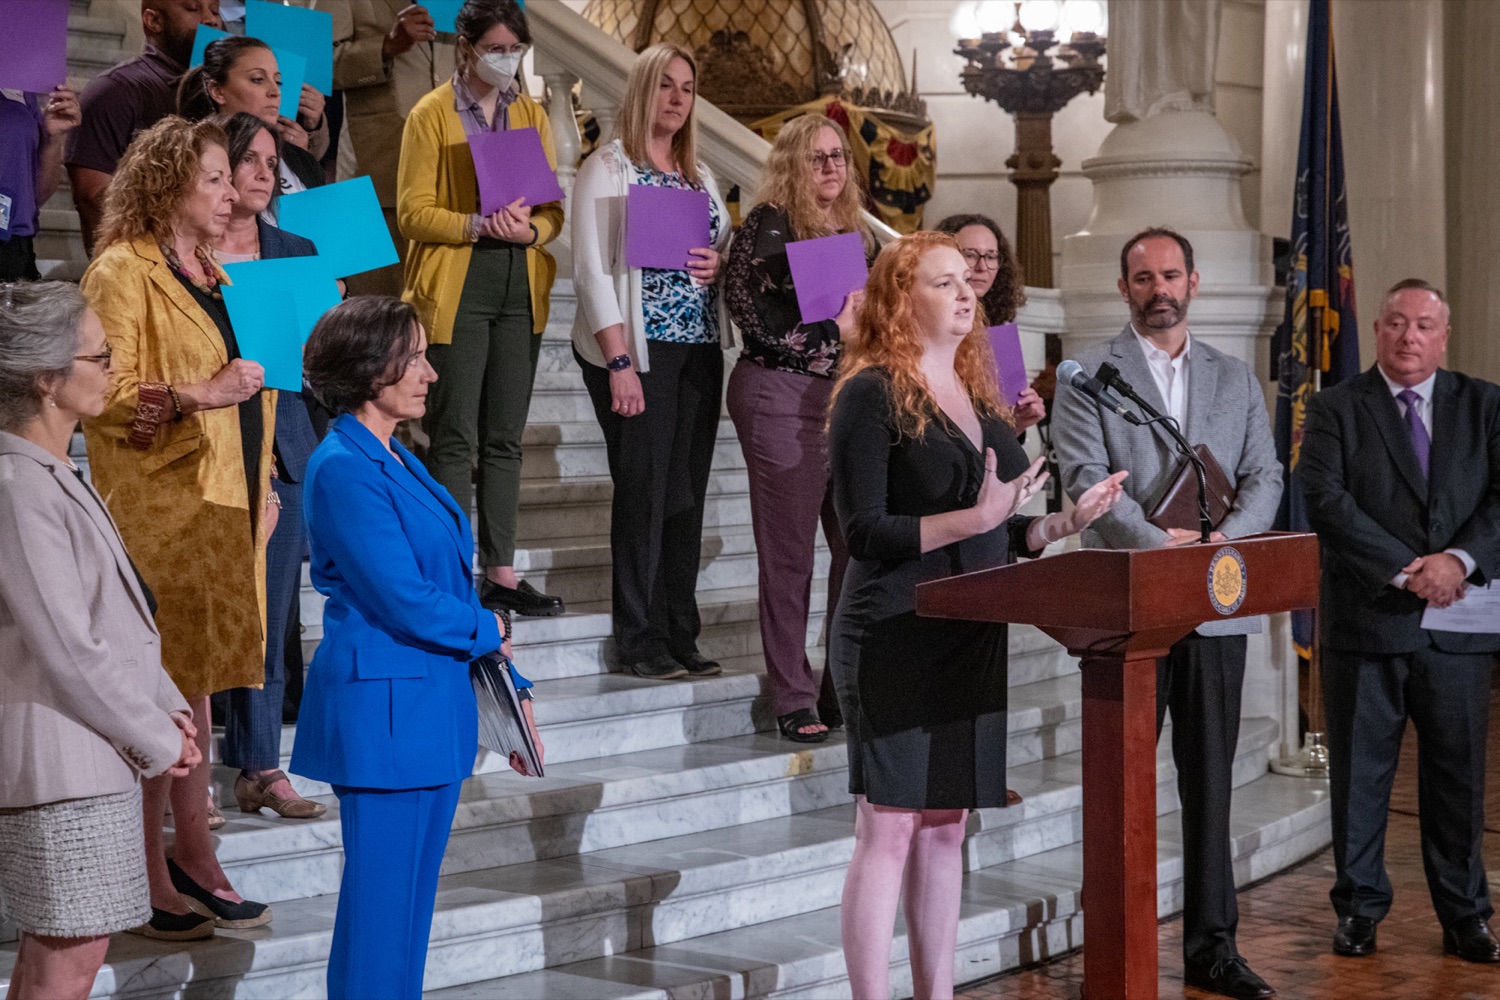 Hannah Metzger, member of Prevent Suicide PA, speaks at Pennsylvanias Suicide Prevention Month Press Conference at the State Capital in Harrisburg, PA.<br><a href="https://filesource.amperwave.net/commonwealthofpa/photo/23696_dhs_suicidePrevention-45.jpg" target="_blank">⇣ Download Photo</a>